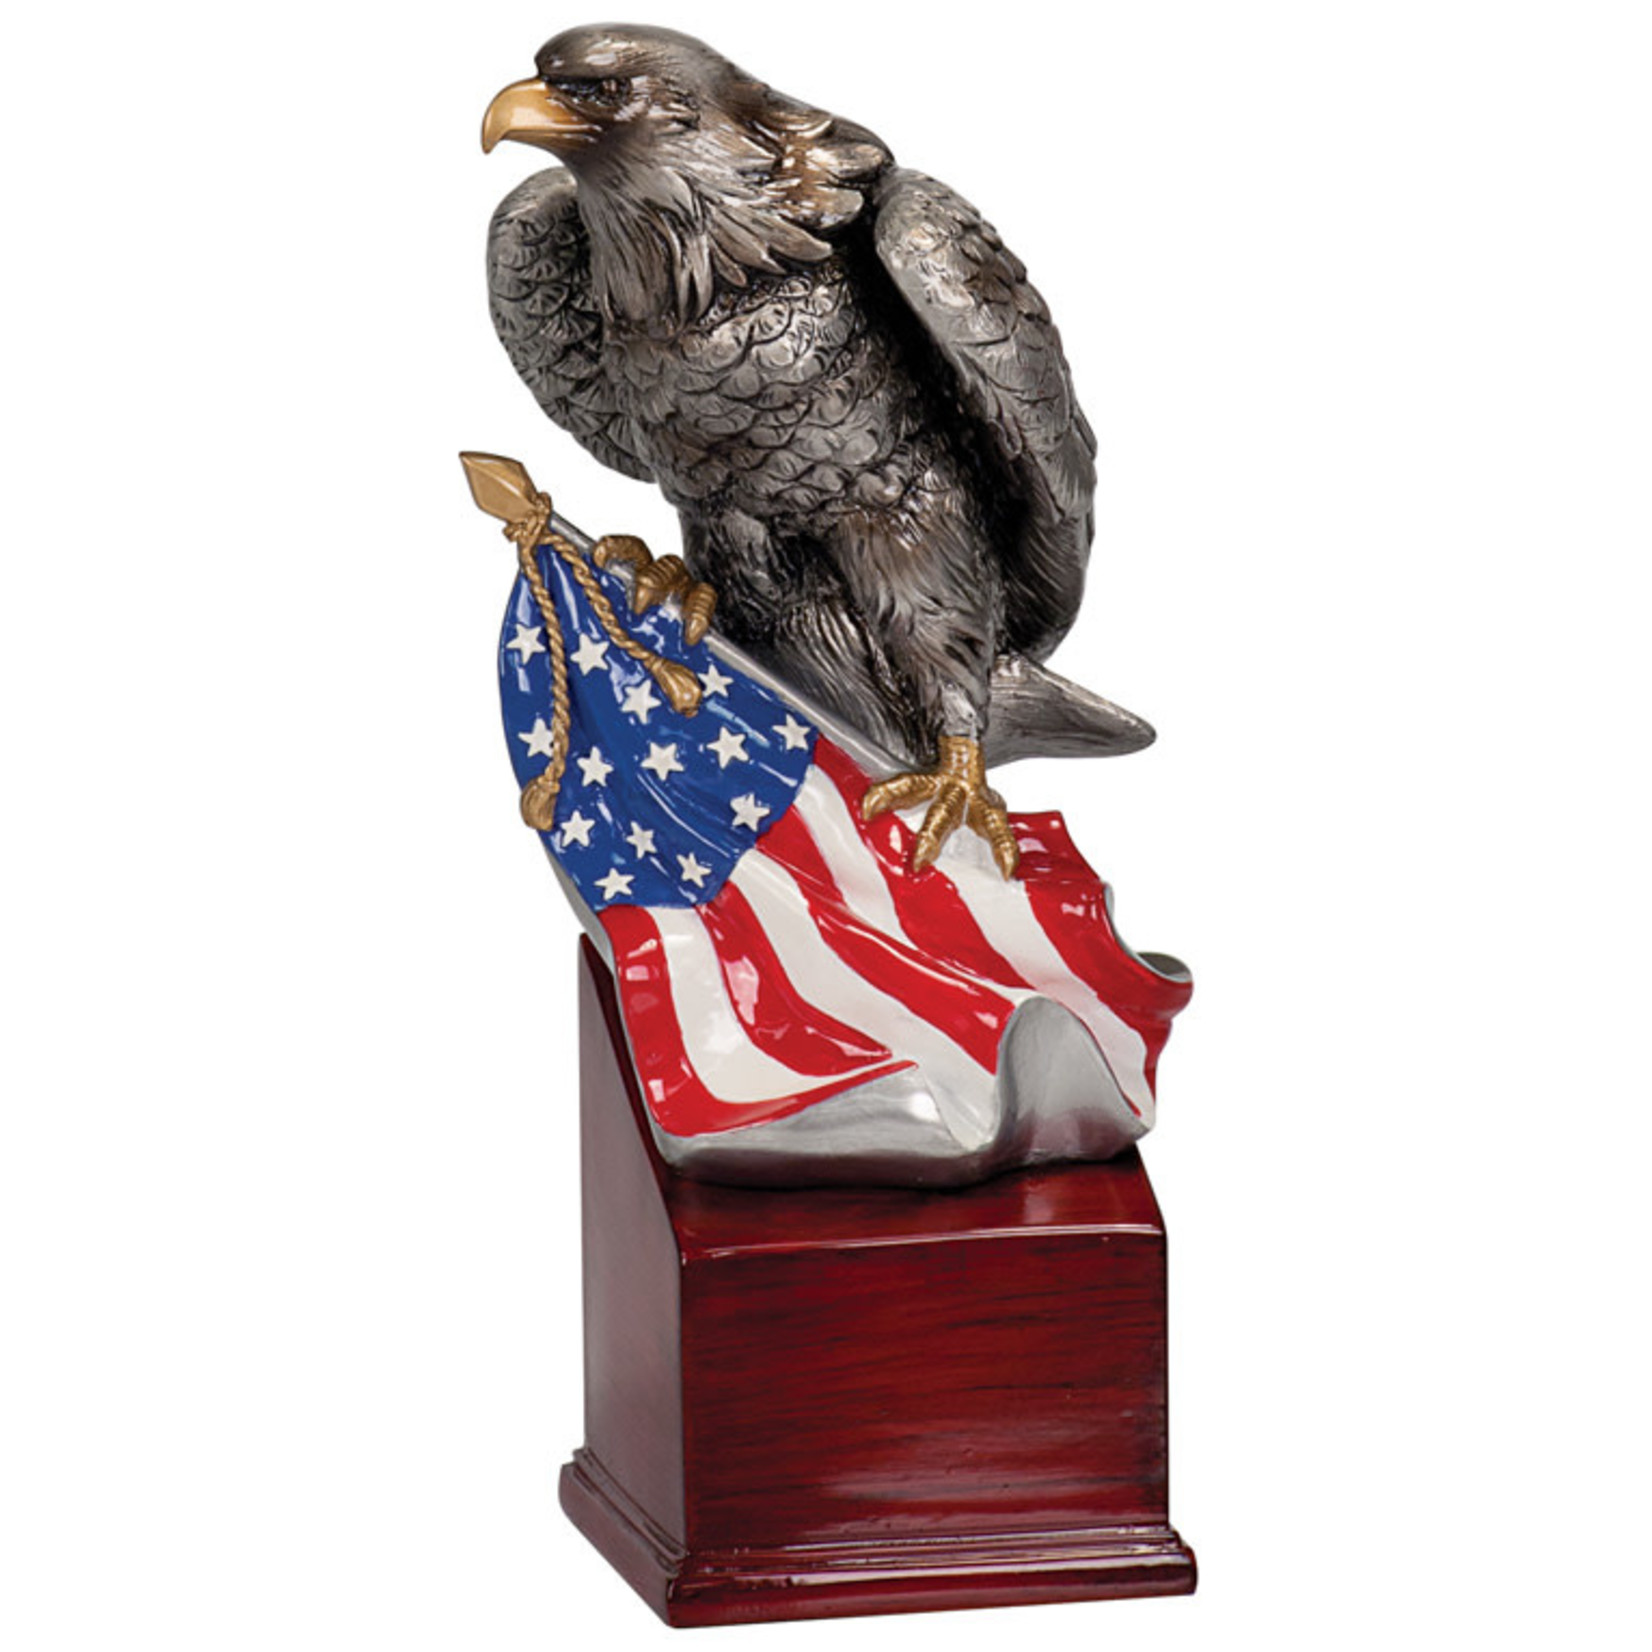 JDS Industries 8 3/4" Eagle and Flag Wings Down on Resin Base includes plate